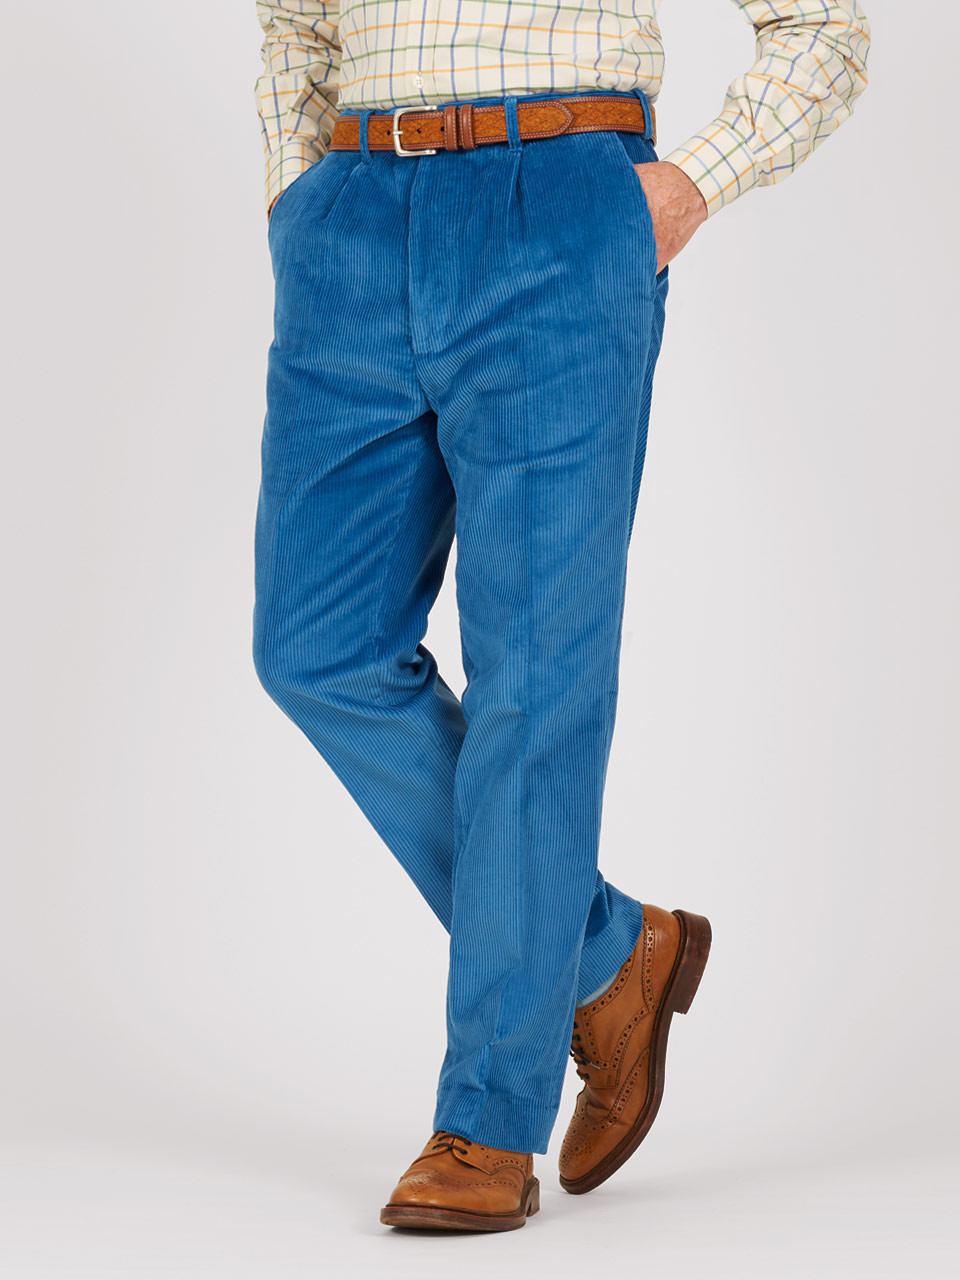 Mens LLBean Stretch Country Corduroy Pants Classic Fit Plain Front   Pants at LLBean